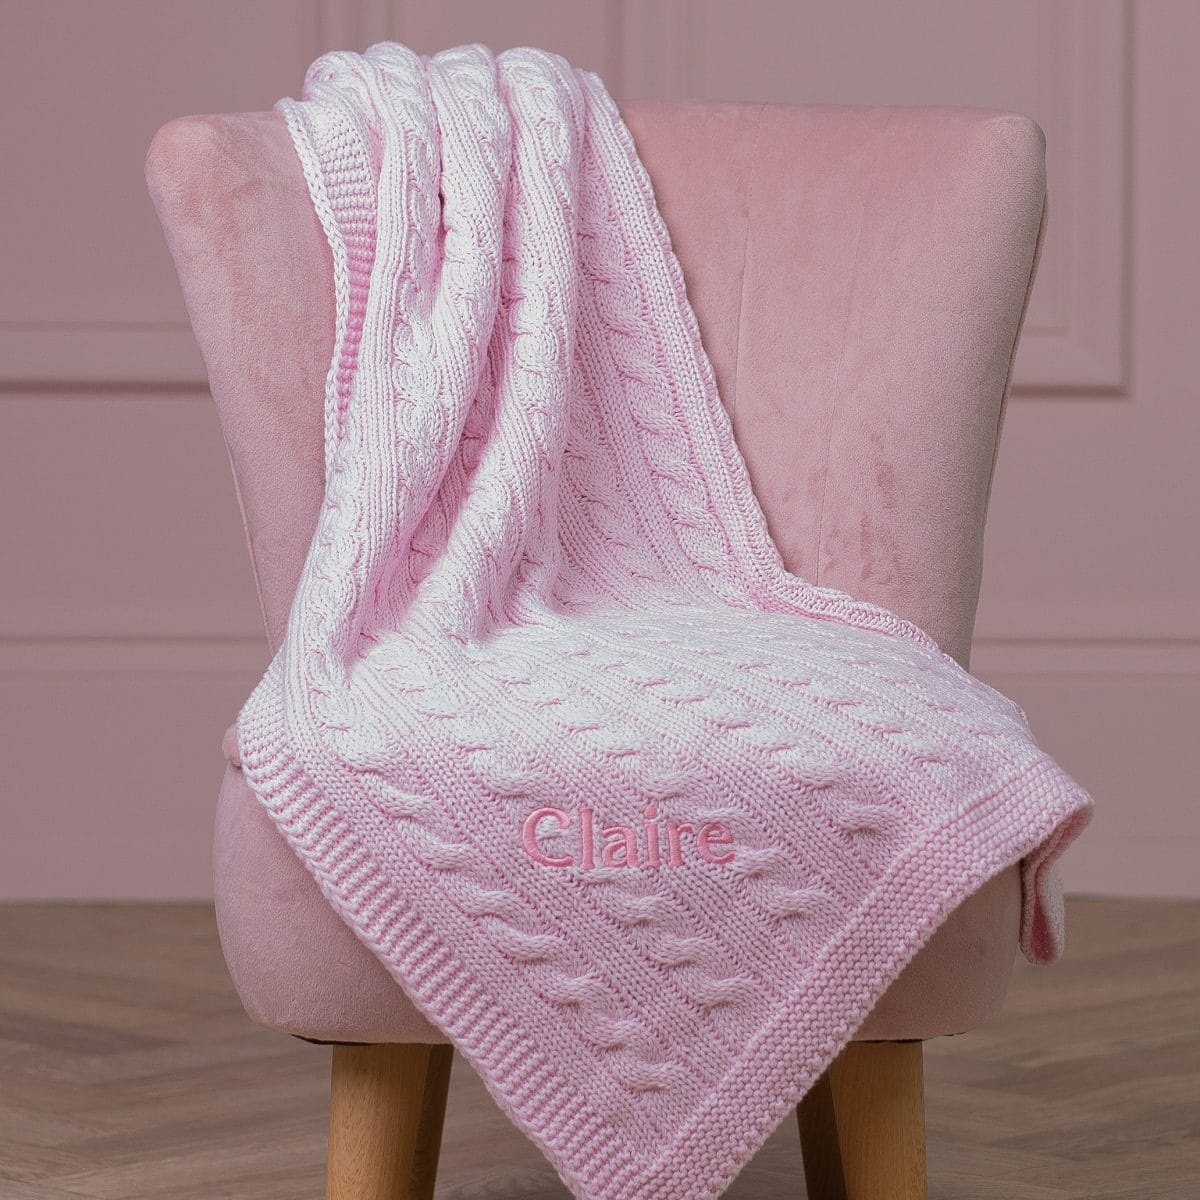 Toffee Moon personalised pale pink luxury cable baby blanket Christening Gifts 2